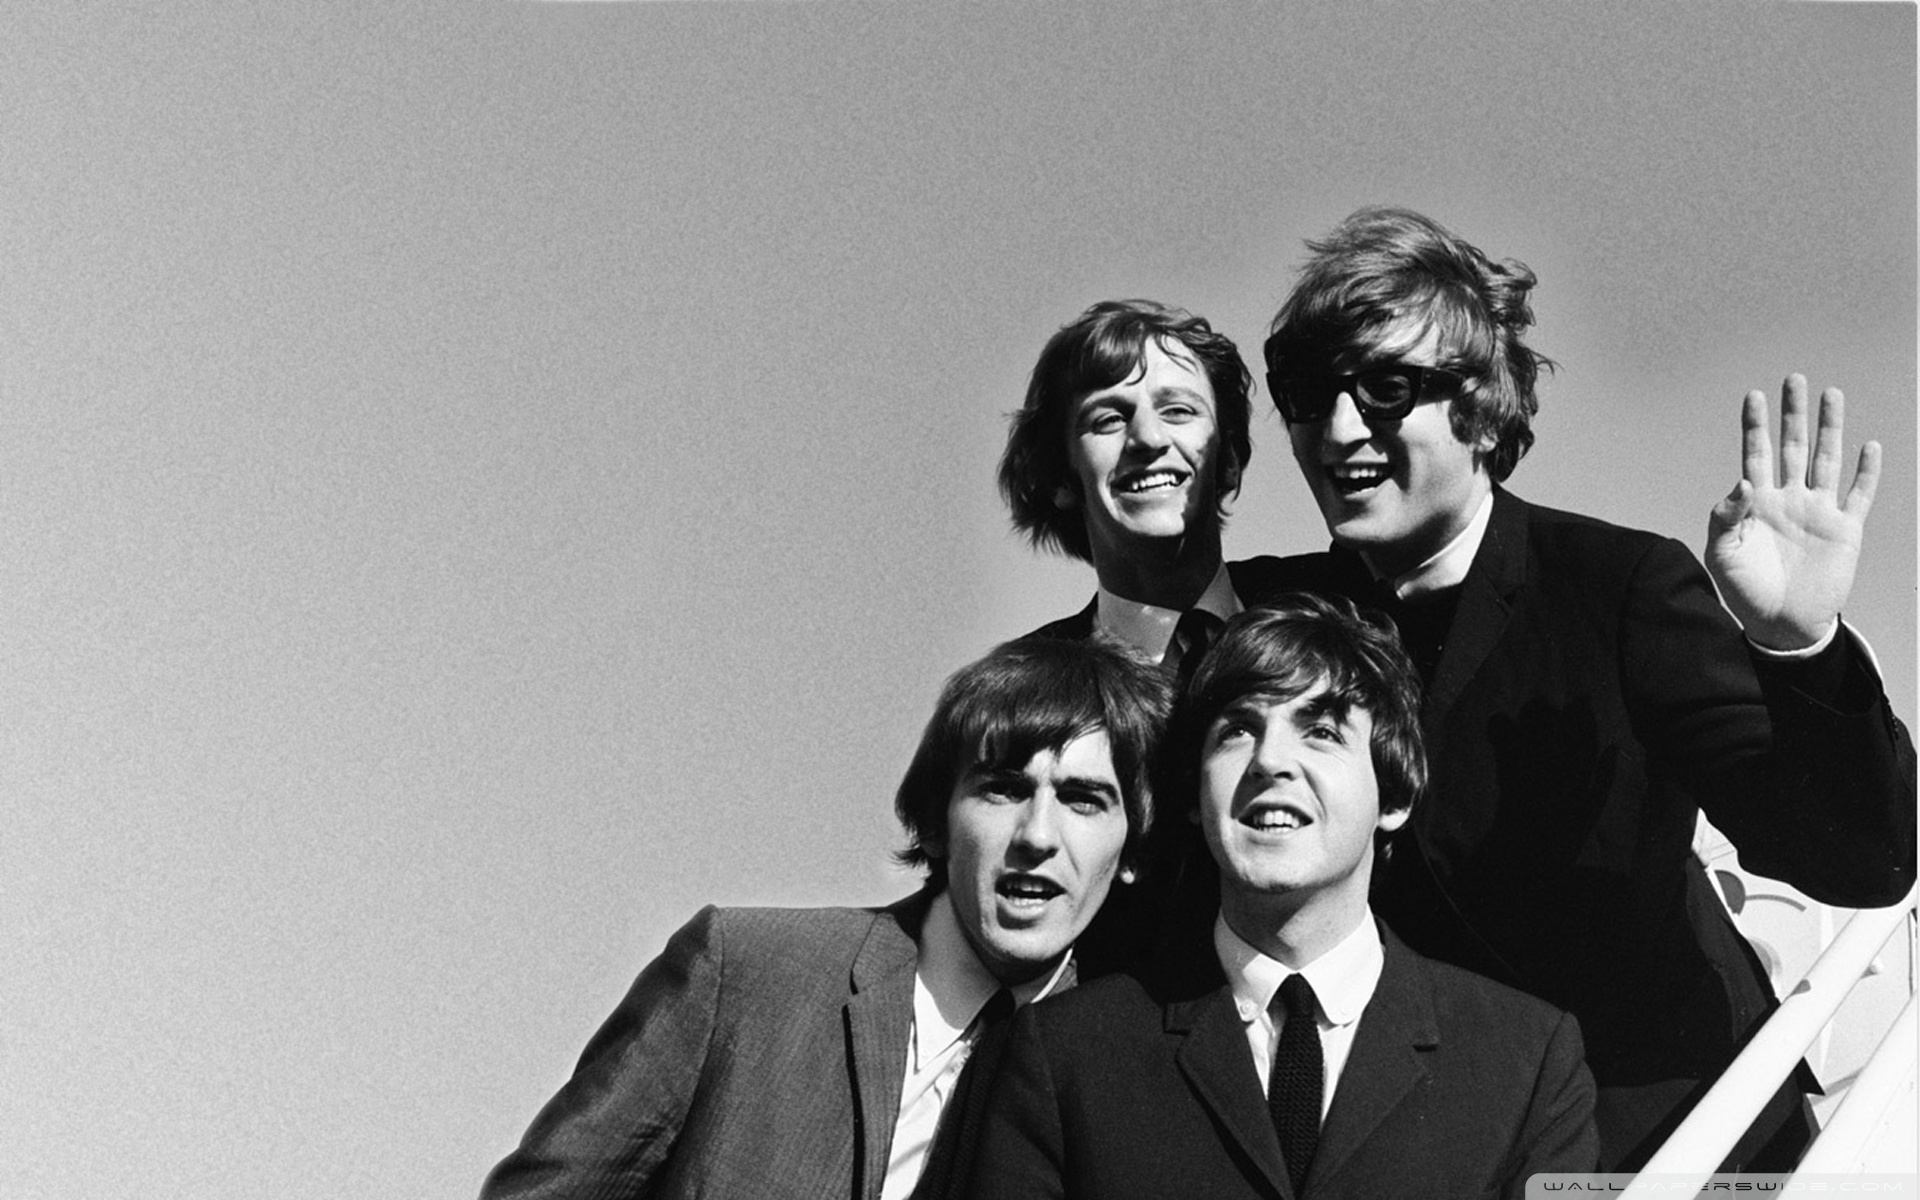 The Beatles HD Wallpaper Background Image 1920x1200 ID 148907 